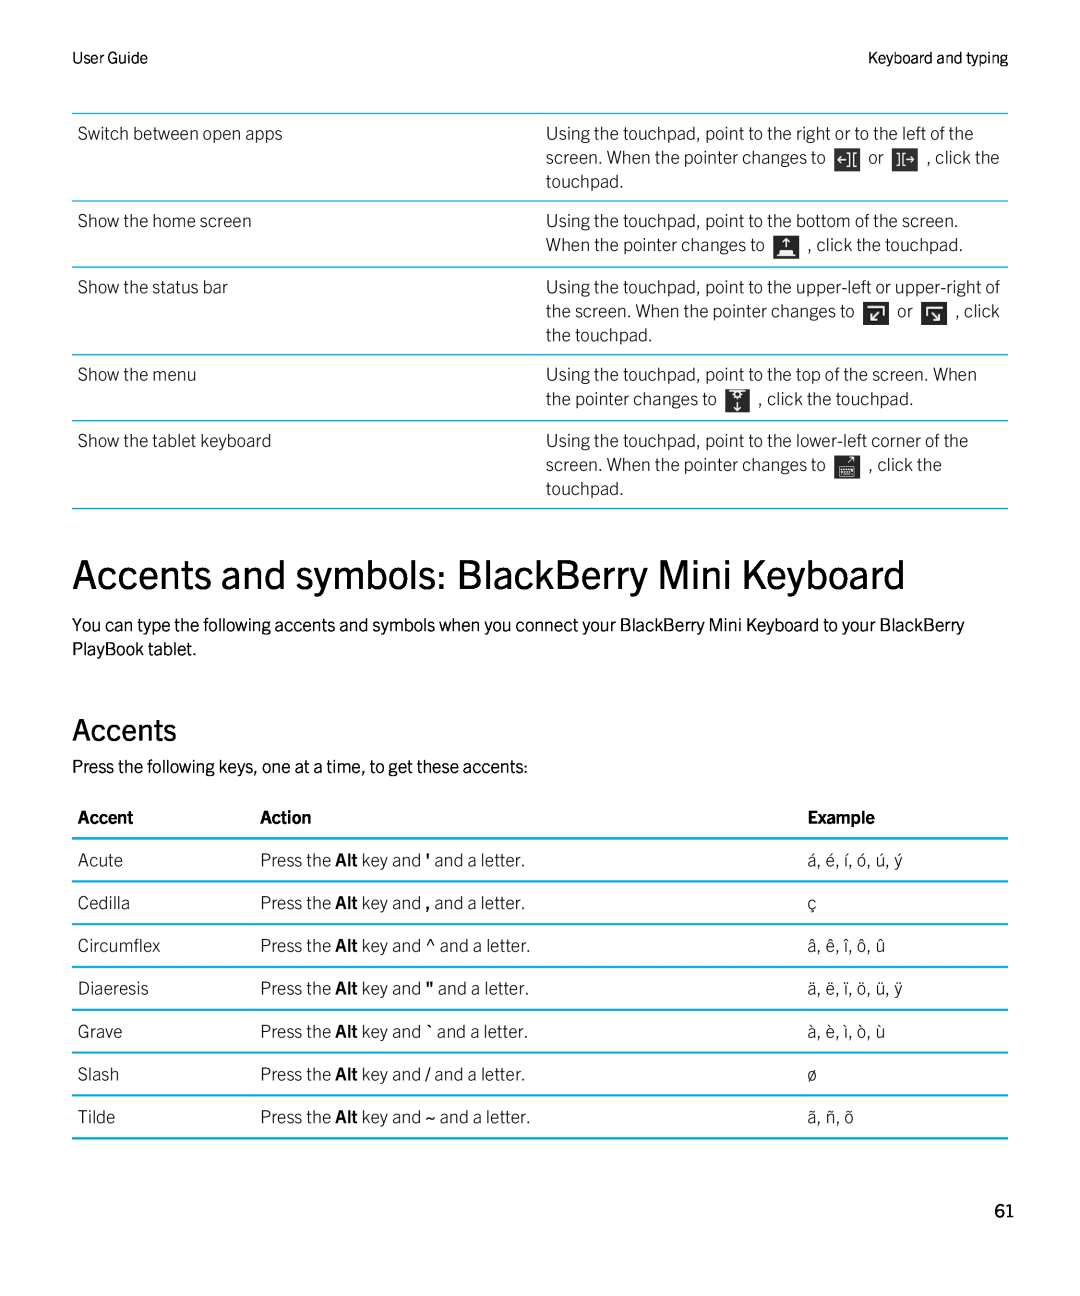 Blackberry 2.0.1 manual Accents and symbols BlackBerry Mini Keyboard, Action, Example 